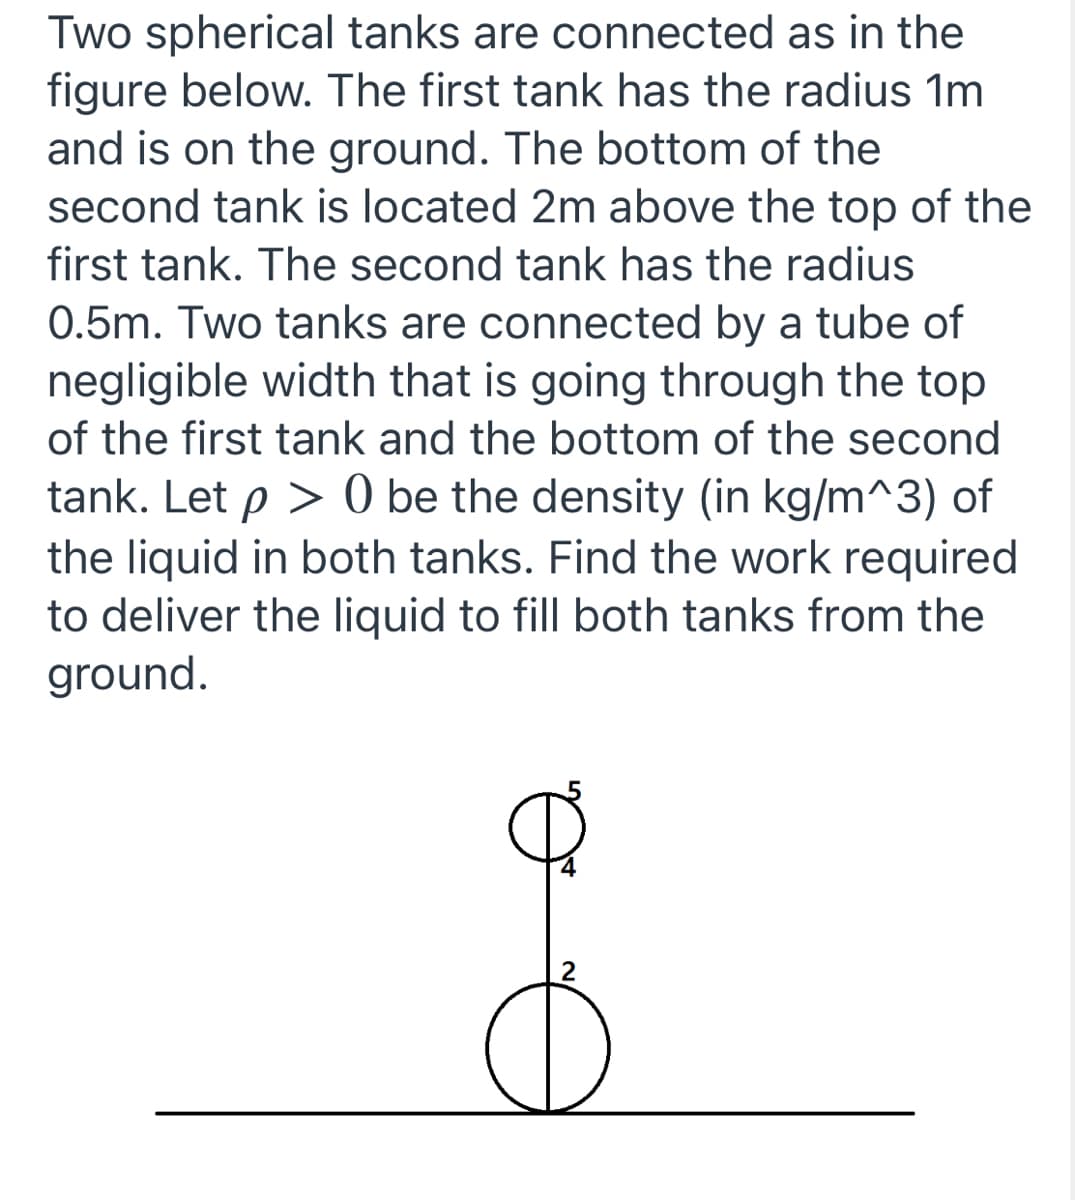 **Problem Explanation: Spherical Tanks Connected by a Tube**

Two spherical tanks are interconnected as illustrated in the provided diagram. Below are the key details about the system:

1. **First Tank**:
   - **Radius**: 1 meter.
   - **Position**: The tank is on the ground.

2. **Second Tank**:
   - **Radius**: 0.5 meters.
   - **Position**: The bottom of this tank is located 2 meters above the top of the first tank.

3. **Connecting Tube**:
   - The tanks are connected by a tube of negligible width. This tube runs from the top of the first tank to the bottom of the second tank.

**Given:**
- \( \rho > 0 \) denotes the density (in kg/m³) of the liquid in both tanks.

**Objective:**
- Determine the work required to pump the liquid from the ground to fill both tanks.

**Diagram Details:**
- The diagram visually represents the two spherical tanks and the connecting tube.
- It features the dimensions for placement:
  - The first tank (larger) is positioned on the line representing the ground. 
  - The second tank (smaller), is elevated, showing 2 meters distance above the top of the first tank.

**Steps to Solve:**
1. **Calculate the Volume of Both Tanks**:
   - Volume of the first tank (V₁): 
     \[
     V₁ = \frac{4}{3} \pi (1)^3 = \frac{4}{3} \pi \, \text{m}^3
     \]
   - Volume of the second tank (V₂): 
     \[
     V₂ = \frac{4}{3} \pi (0.5)^3 = \frac{4}{3} \pi \left(\frac{1}{8}\right) = \frac{1}{6} \pi \, \text{m}^3
     \]

2. **Determine the Mass of Liquid Needed for Both Tanks**:
   - Mass of liquid for the first tank (M₁): 
     \[
     M₁ = \rho \times V₁ = \rho \times \frac{4}{3} \pi
     \]
   - Mass of liquid for the second tank (M₂): 
     \[
     M₂ =